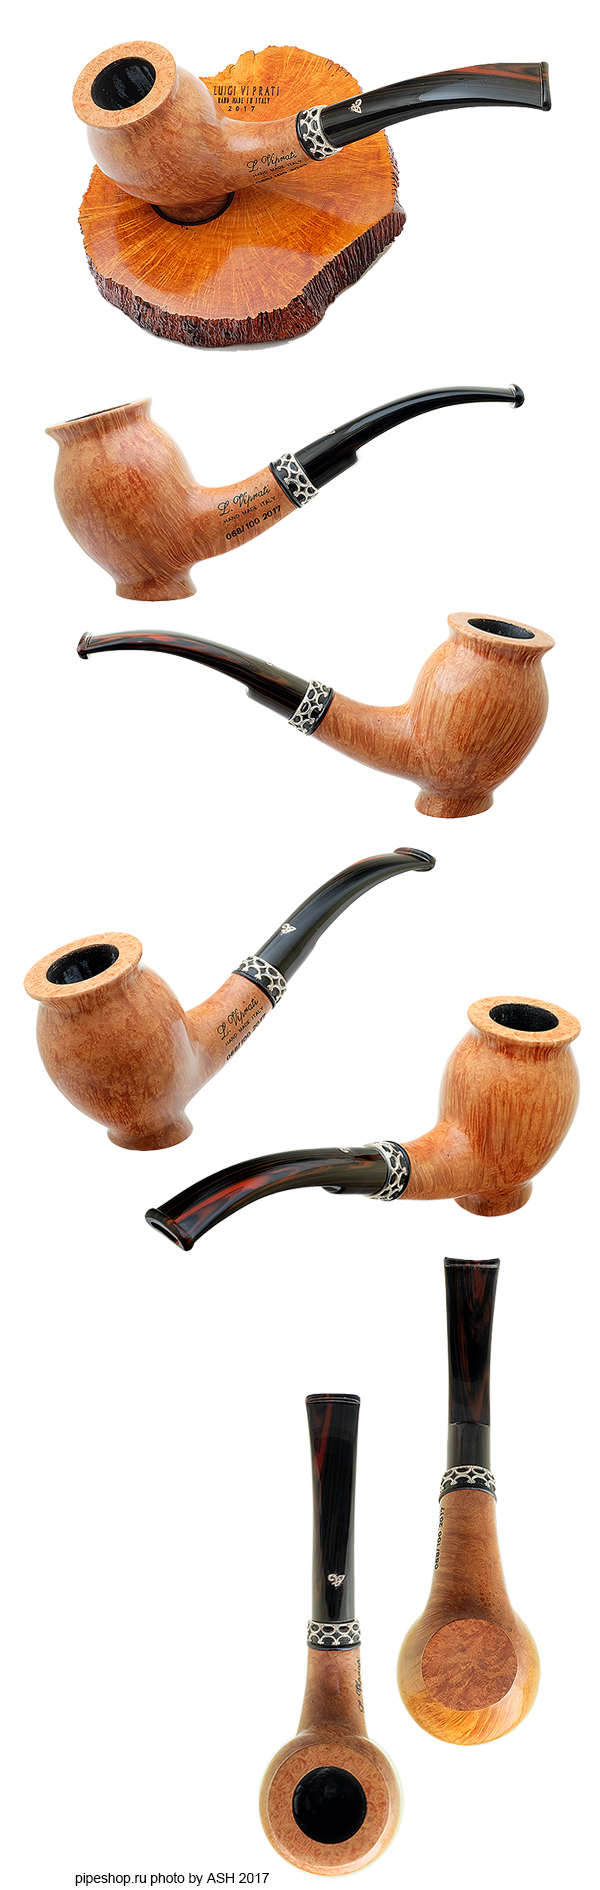   L. VIPRATI SMOOTH PIPE OF THE YEAR 2017 #068/100,  9 